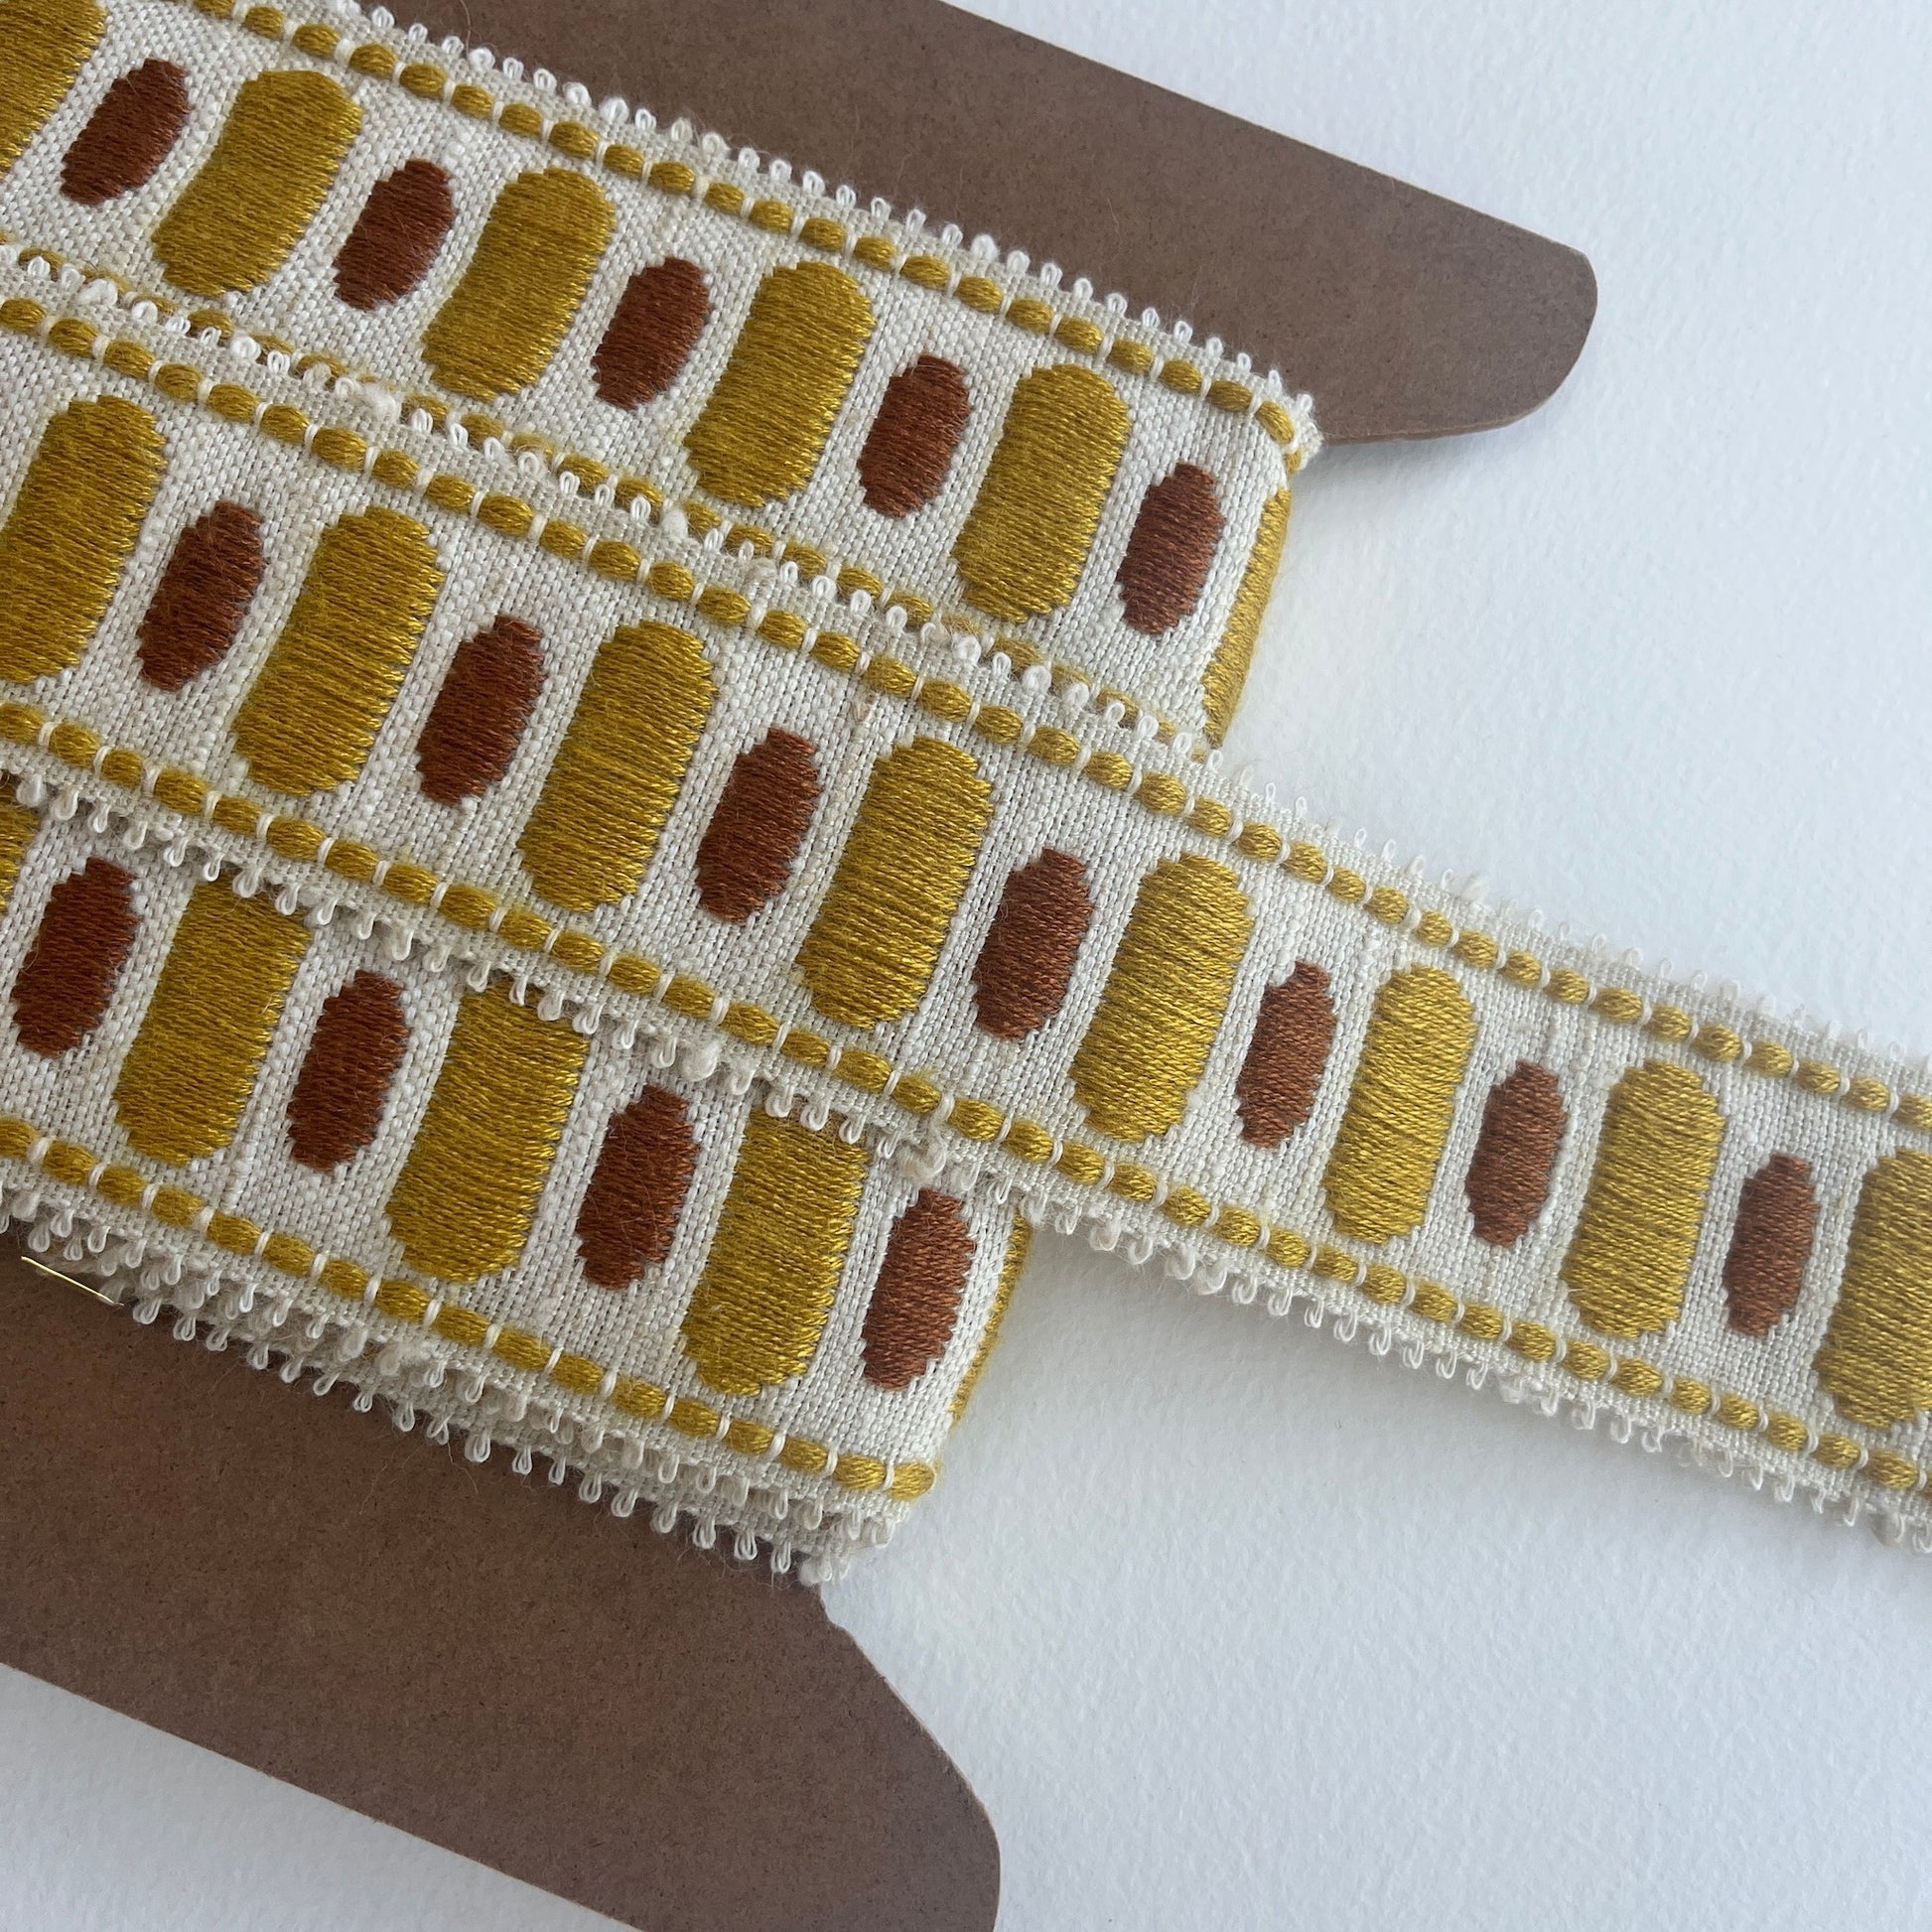 Vintage, retro upholstery trim in made by Dralon - Bayer Fibre textile, manufactured in the 1970s.